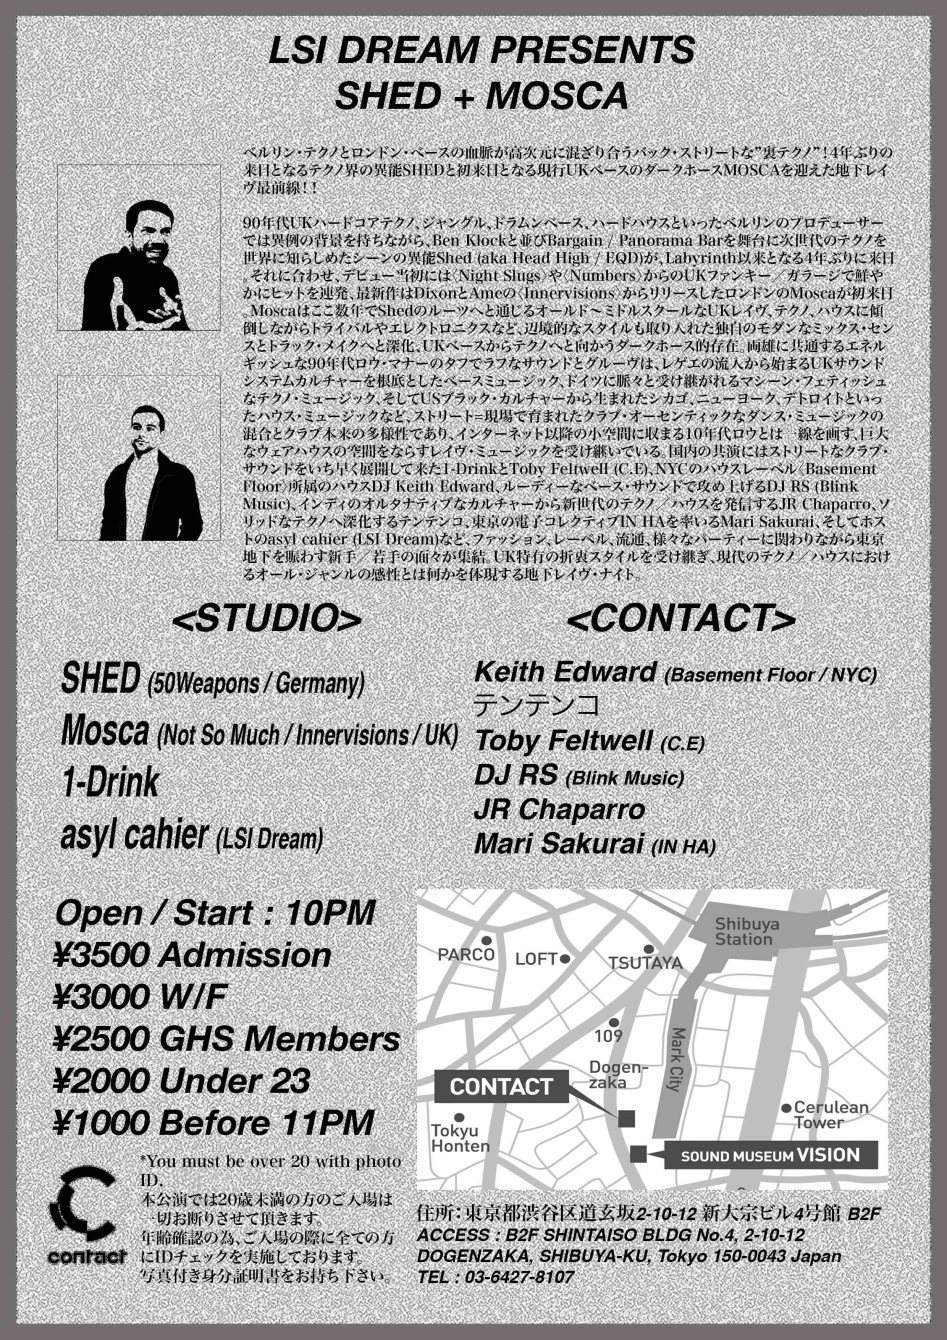 LSI Dream presents Shed & Mosca - フライヤー裏